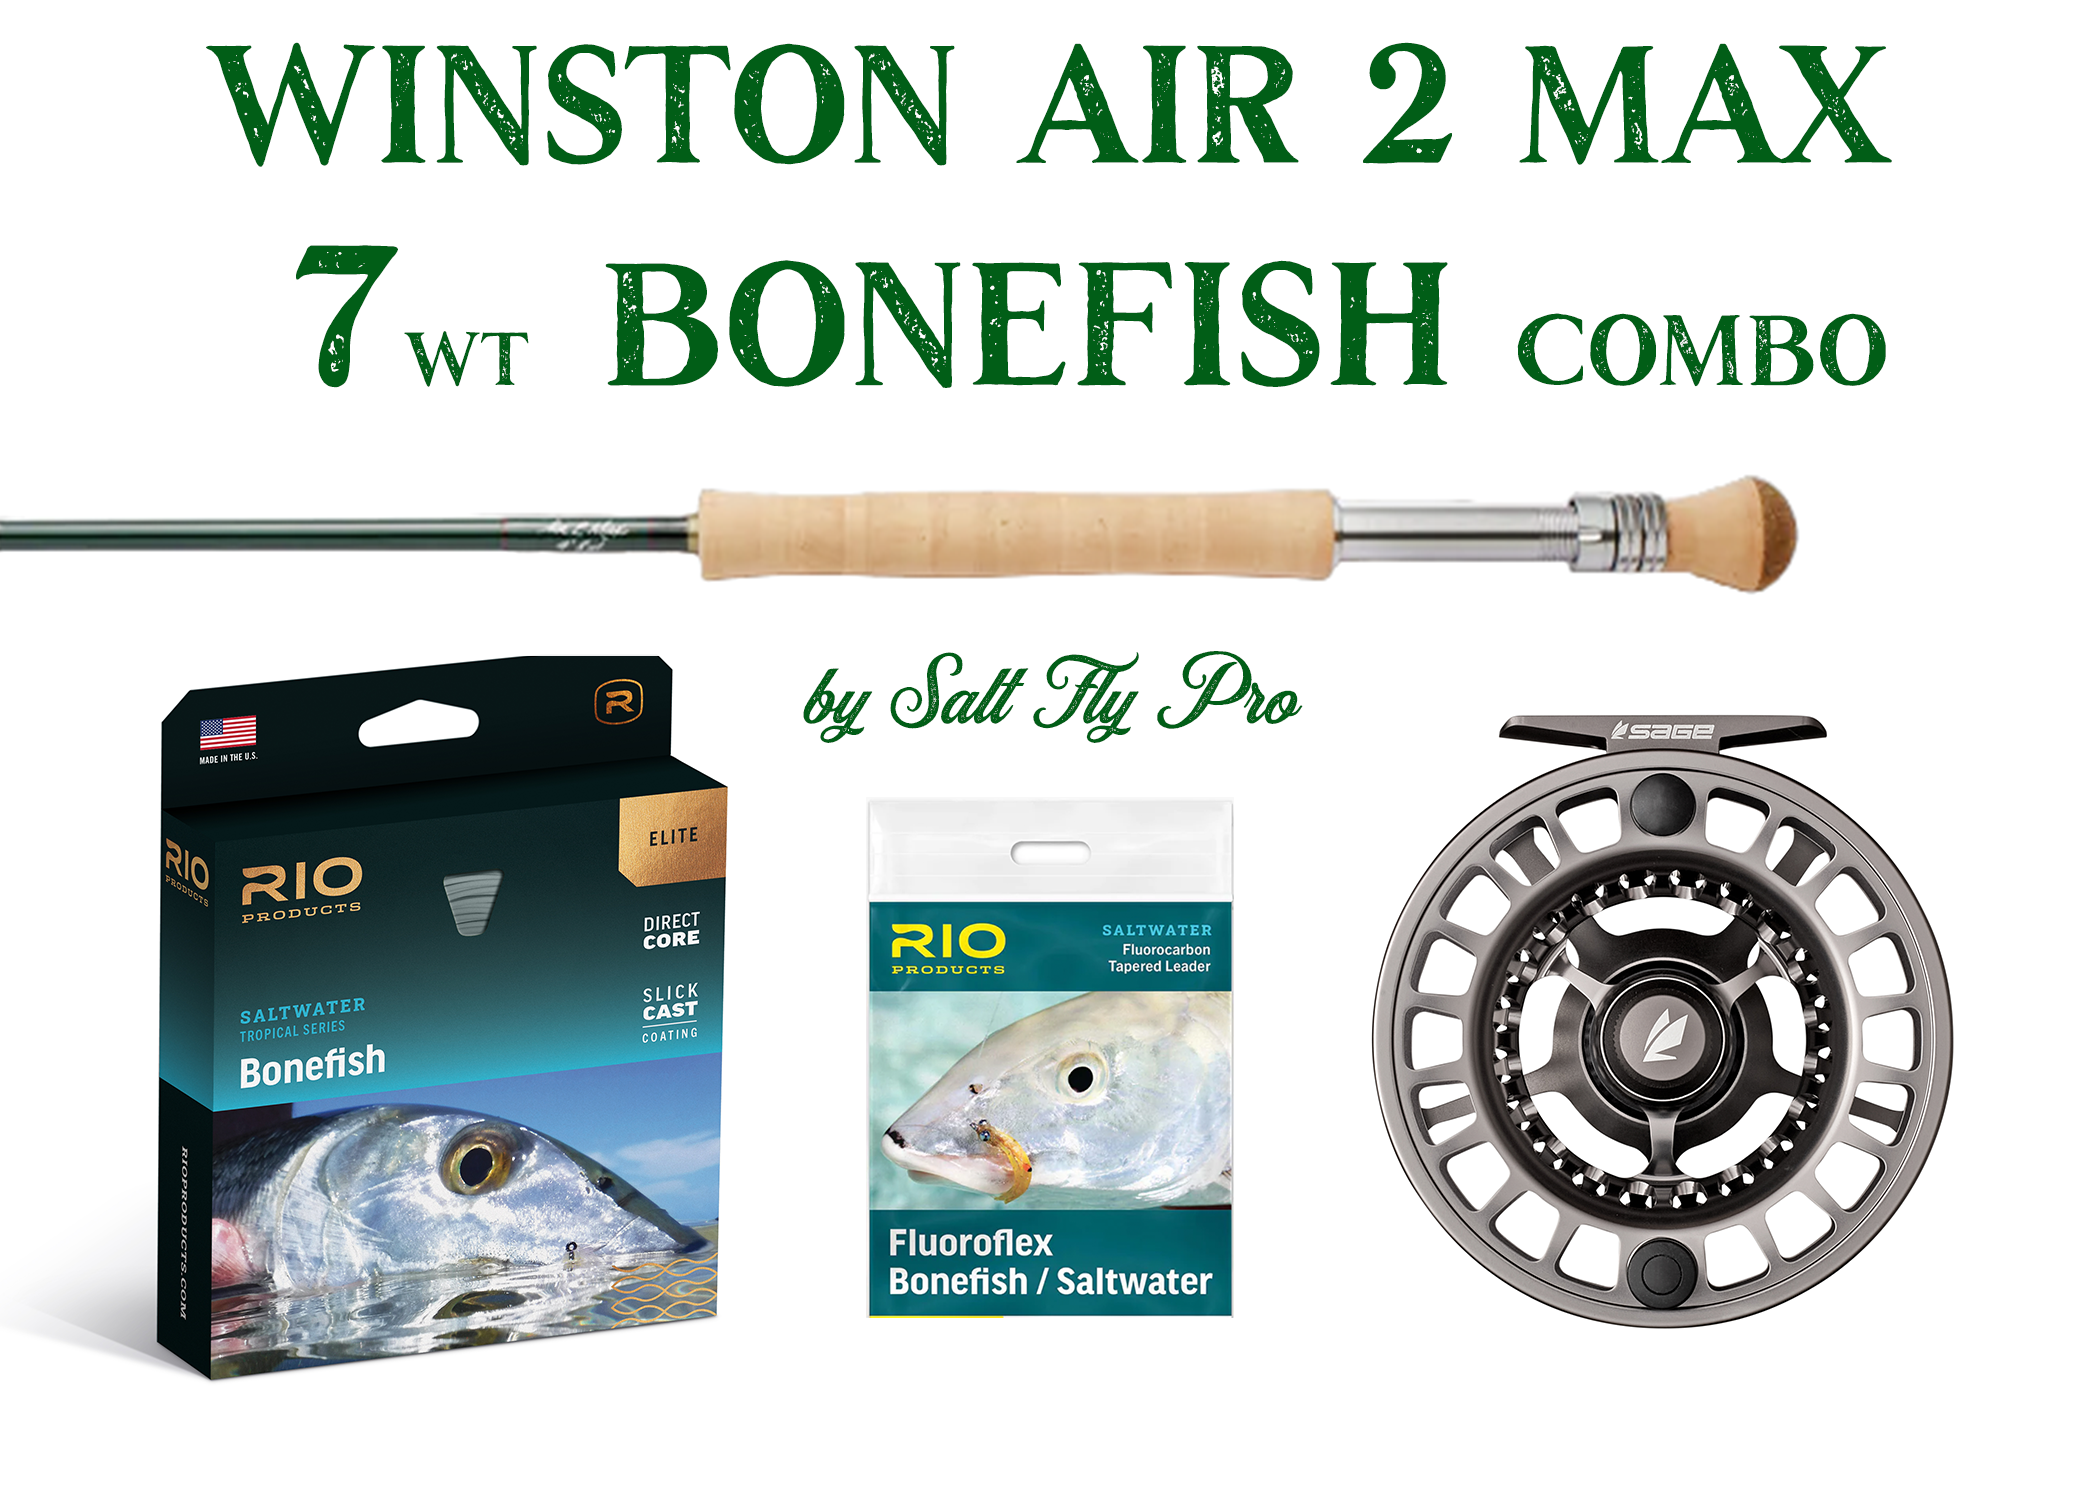 Winston AIR 2 MAX 6wt ULTRALIGHT BONEFISH Fly Rod Combo Outfit - NEW!